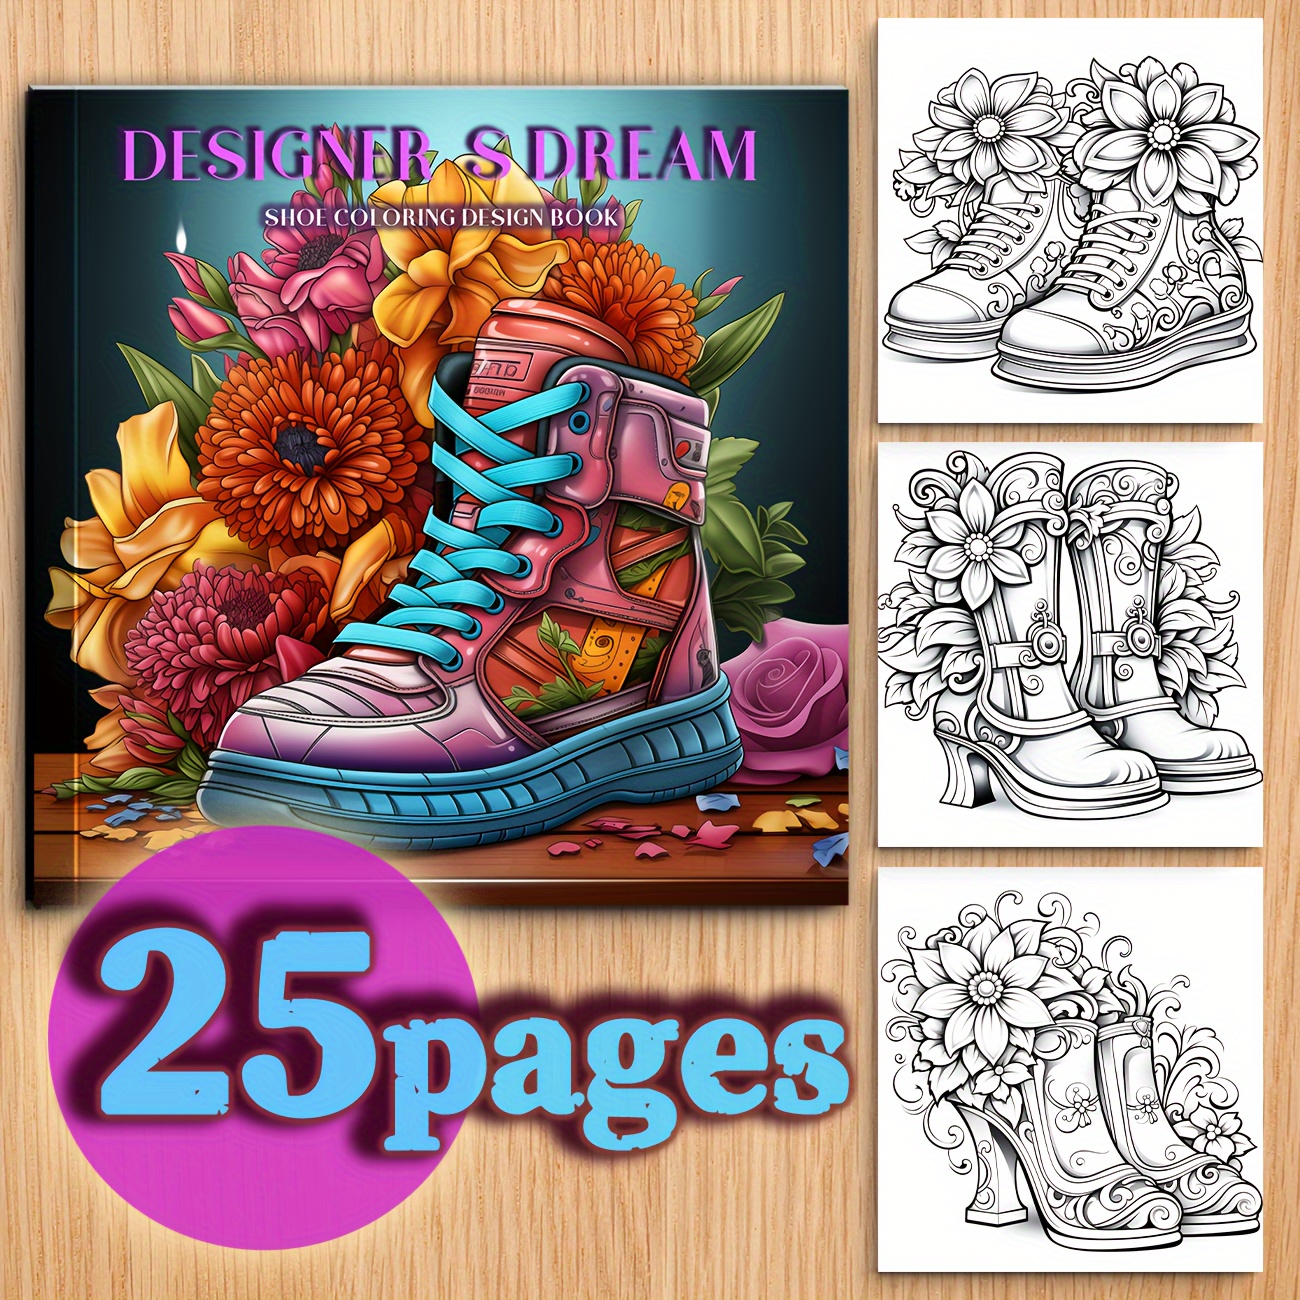 

1 Book 25 Pages Shoe Coloring Design Theme Theme Coloring Books, Hand Painted, Adult Soothing Stress Coloring Books For Thanksgiving Day Birthday Party School Starts, Holiday Gift